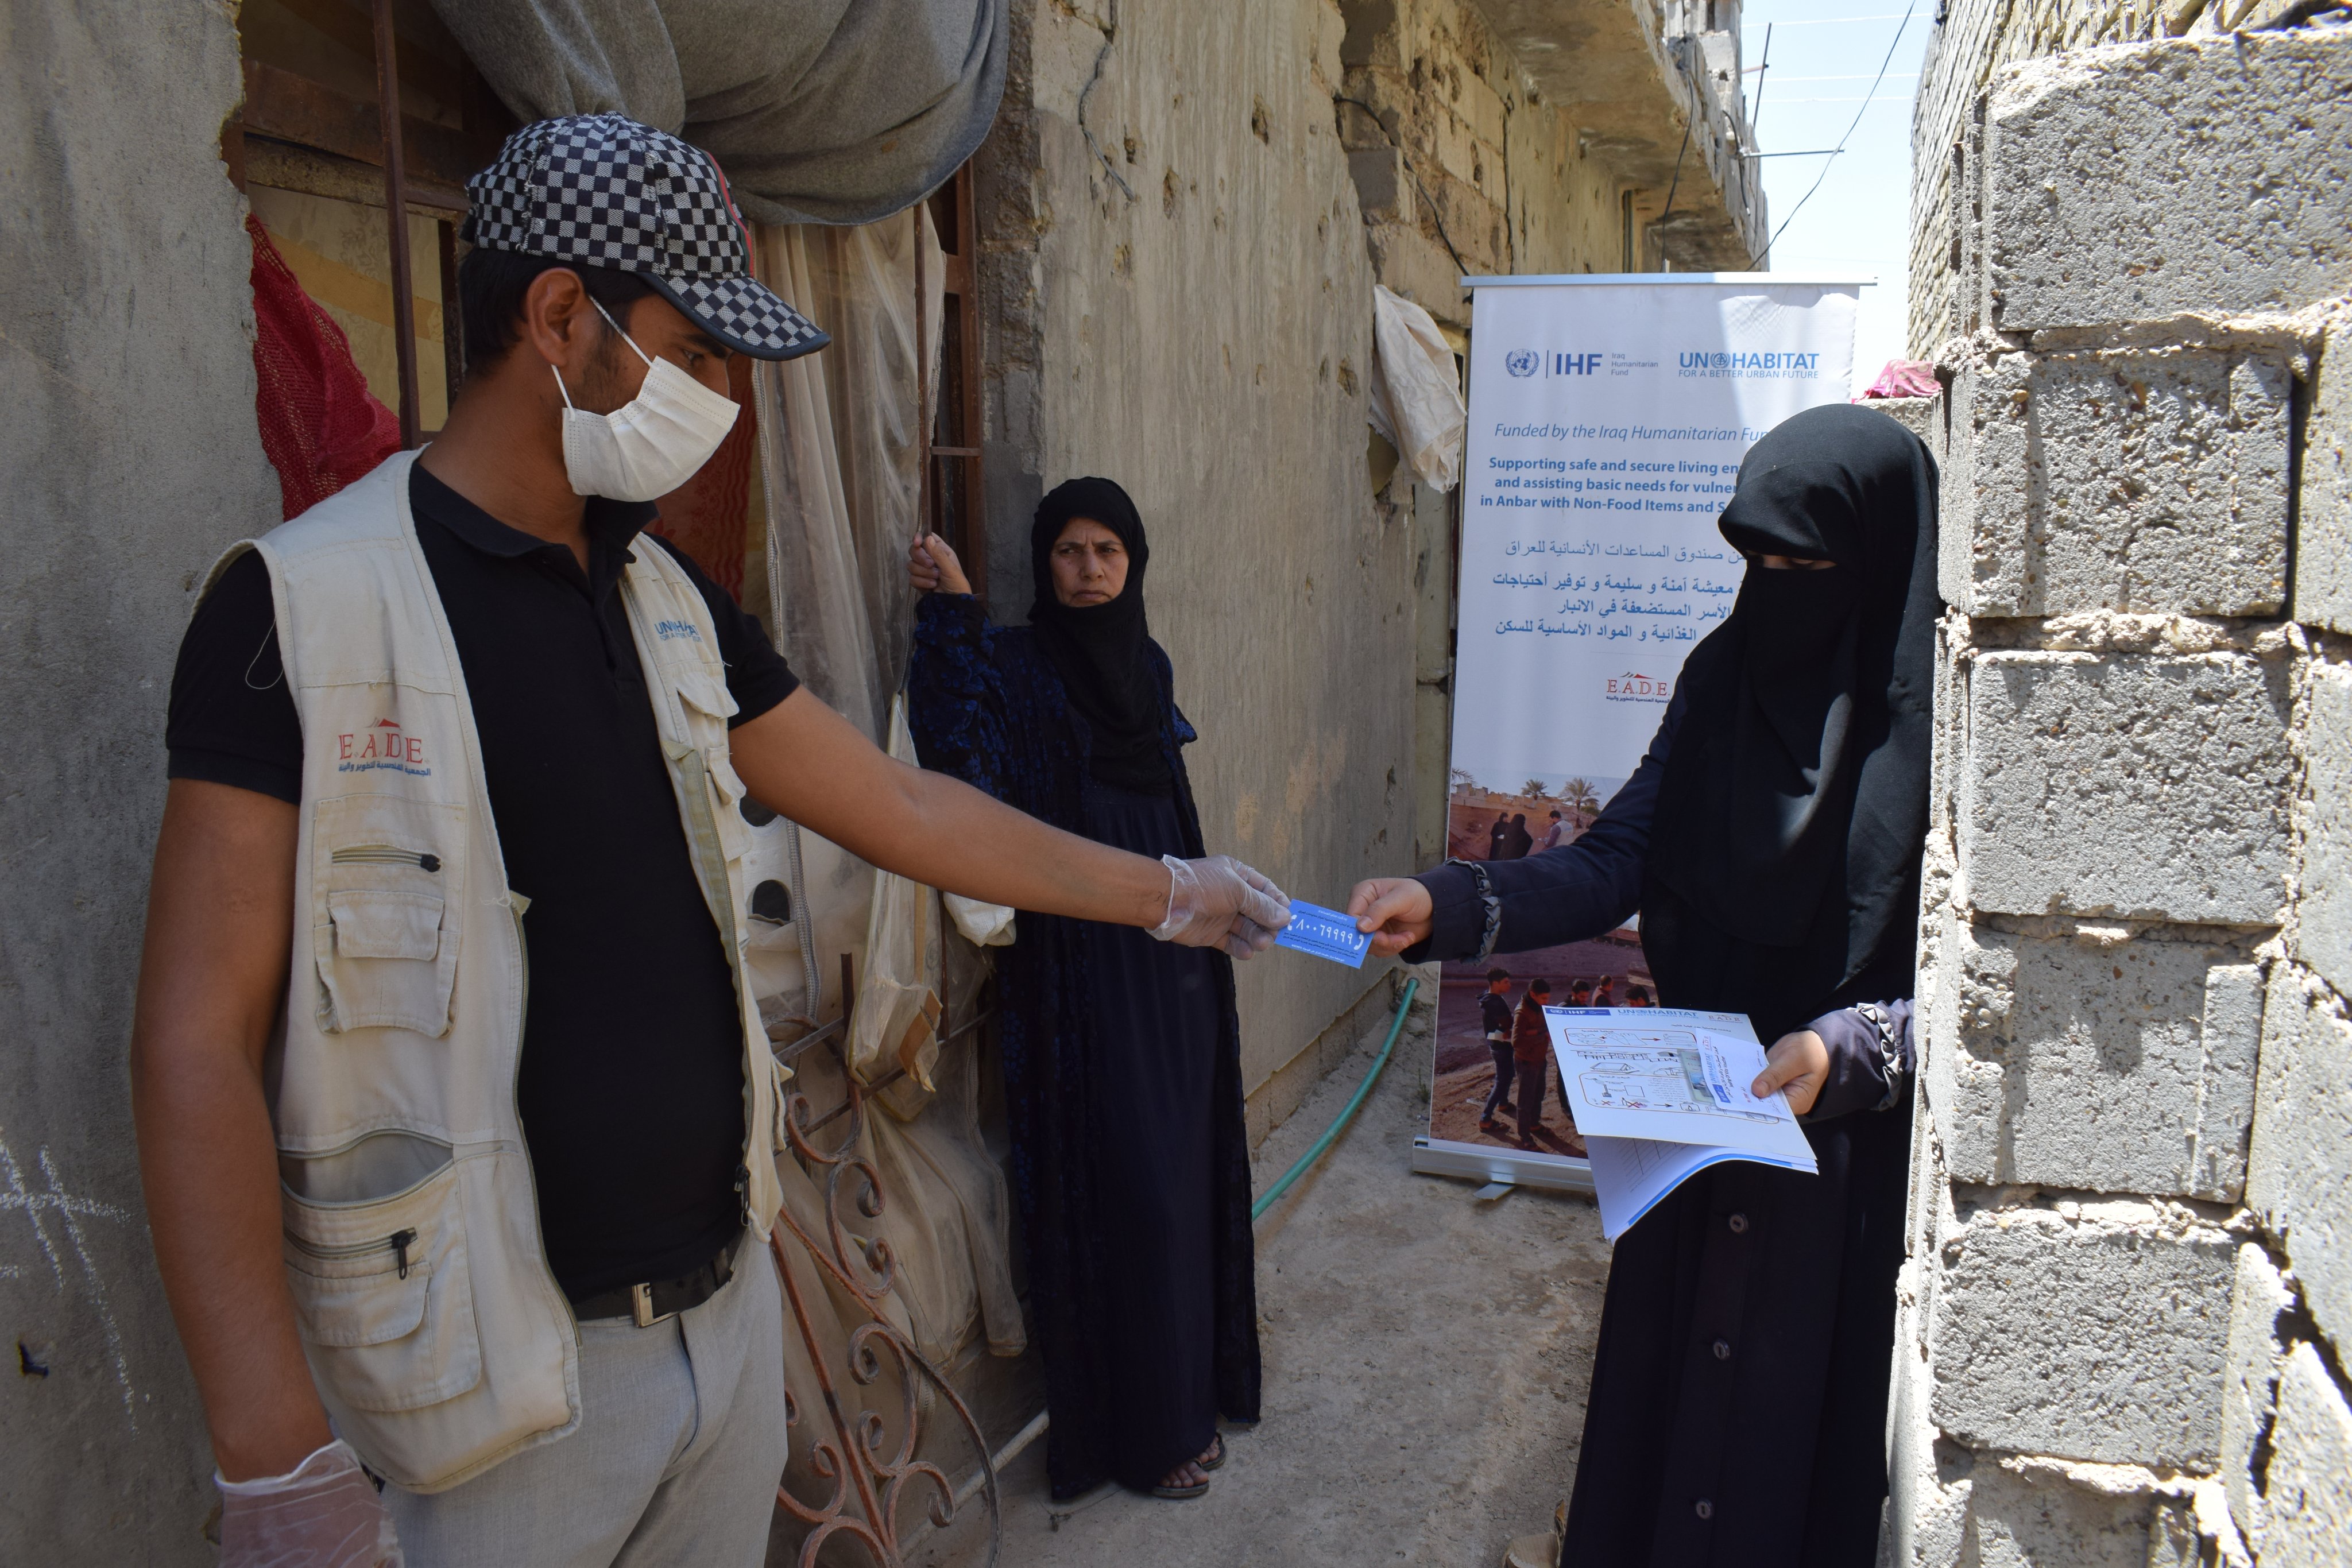 A UN-Habitat staff member does community sensitization on the shelter upgrading project in Anbar, Iraq